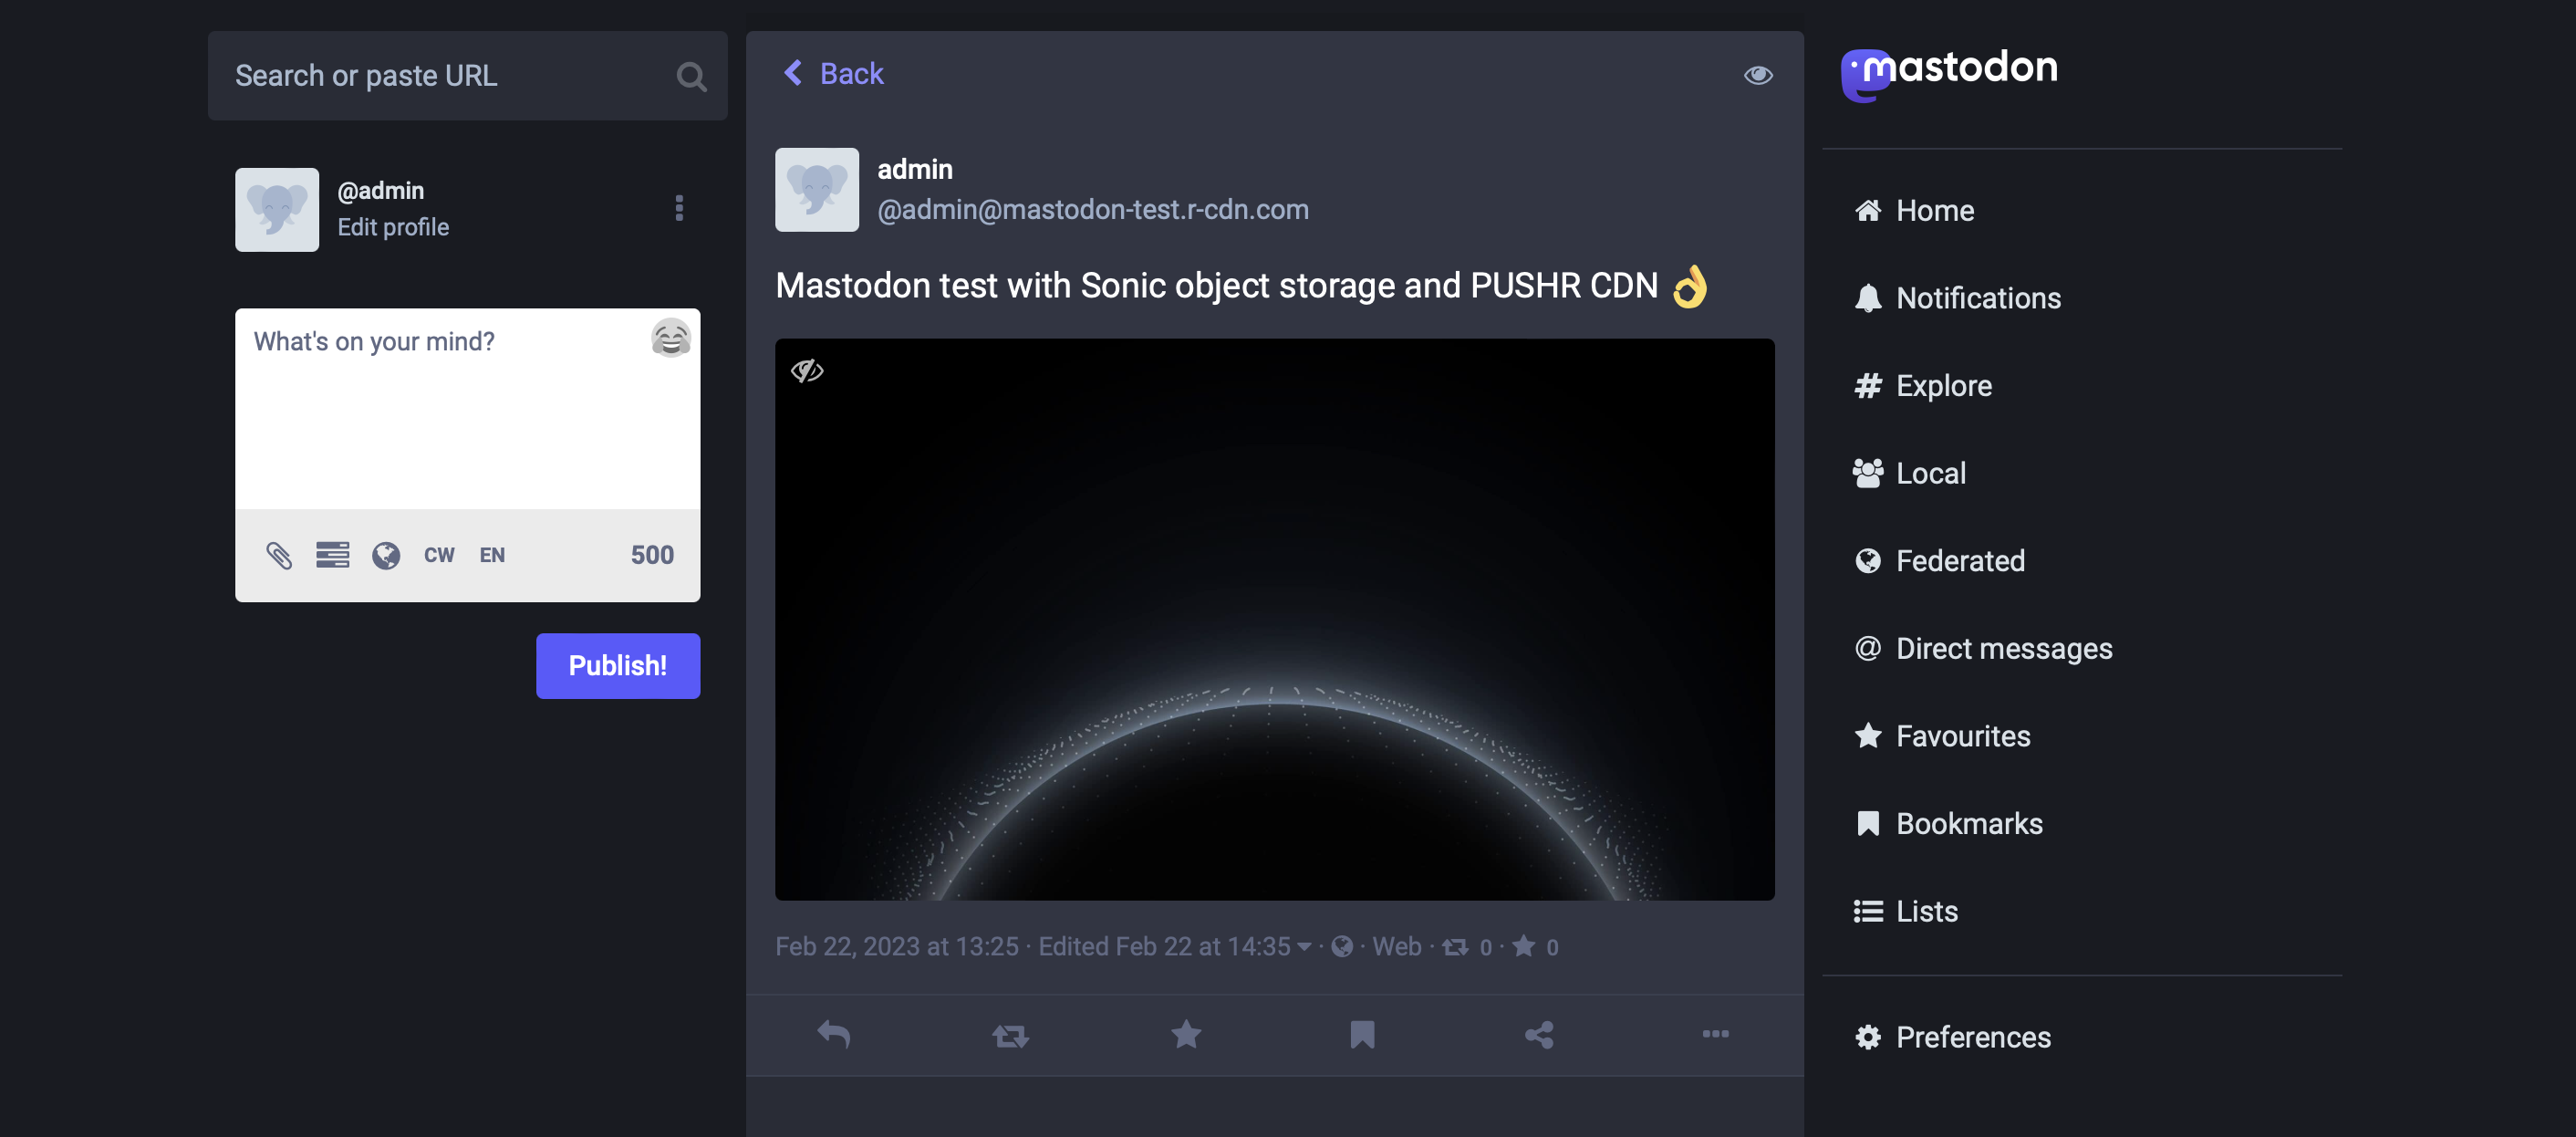 Mastodon with object storage and CDN  by PUSHR - setup completed